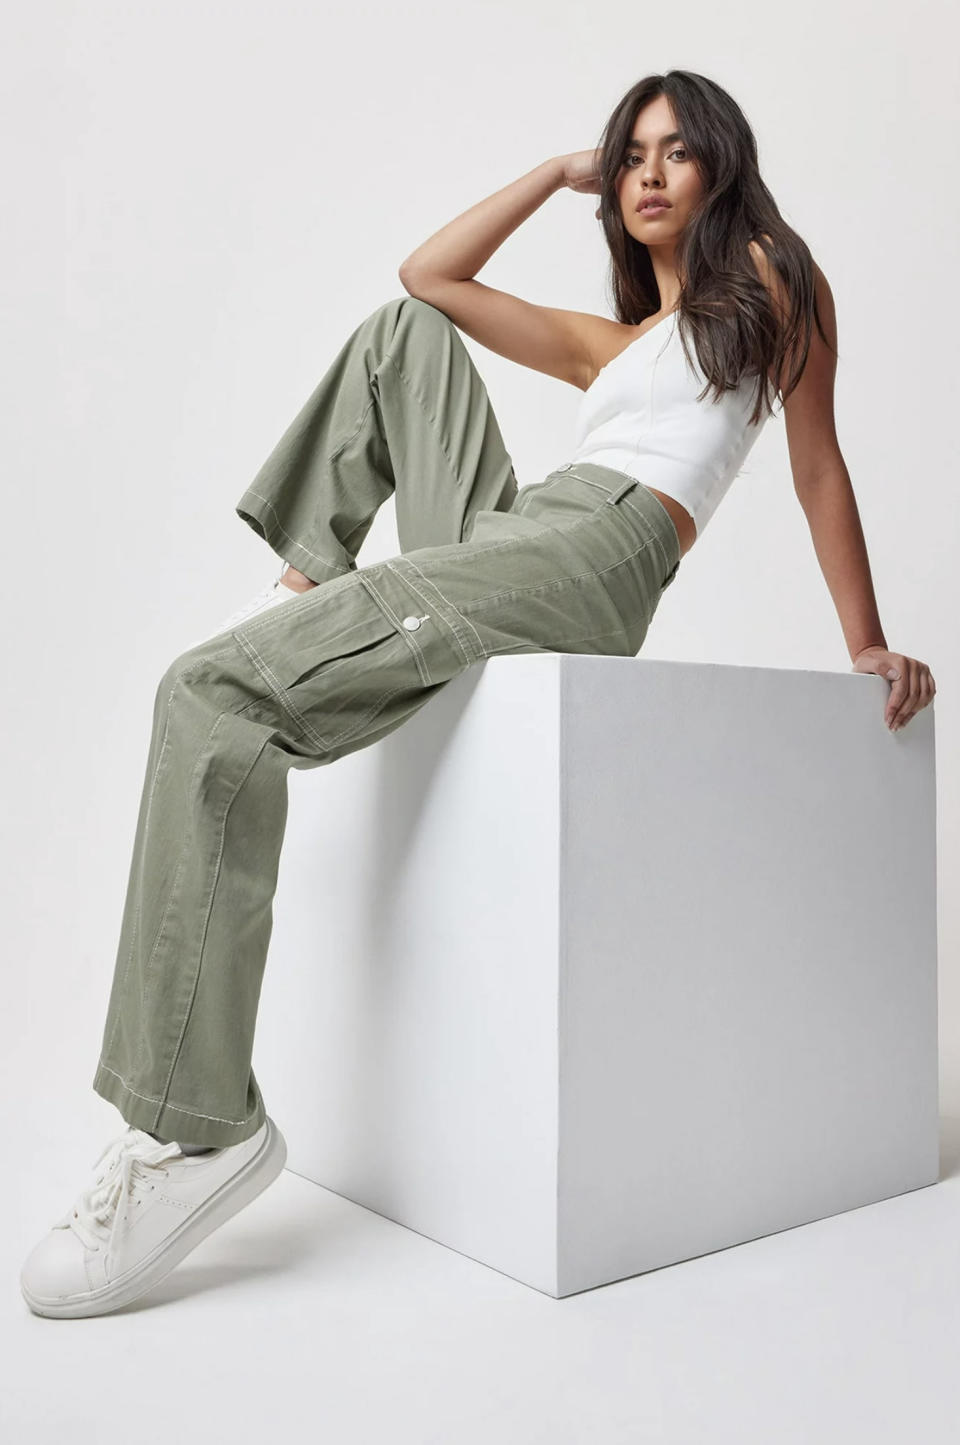 model wearing green denim cargo pants with white sneakers and a white tank top